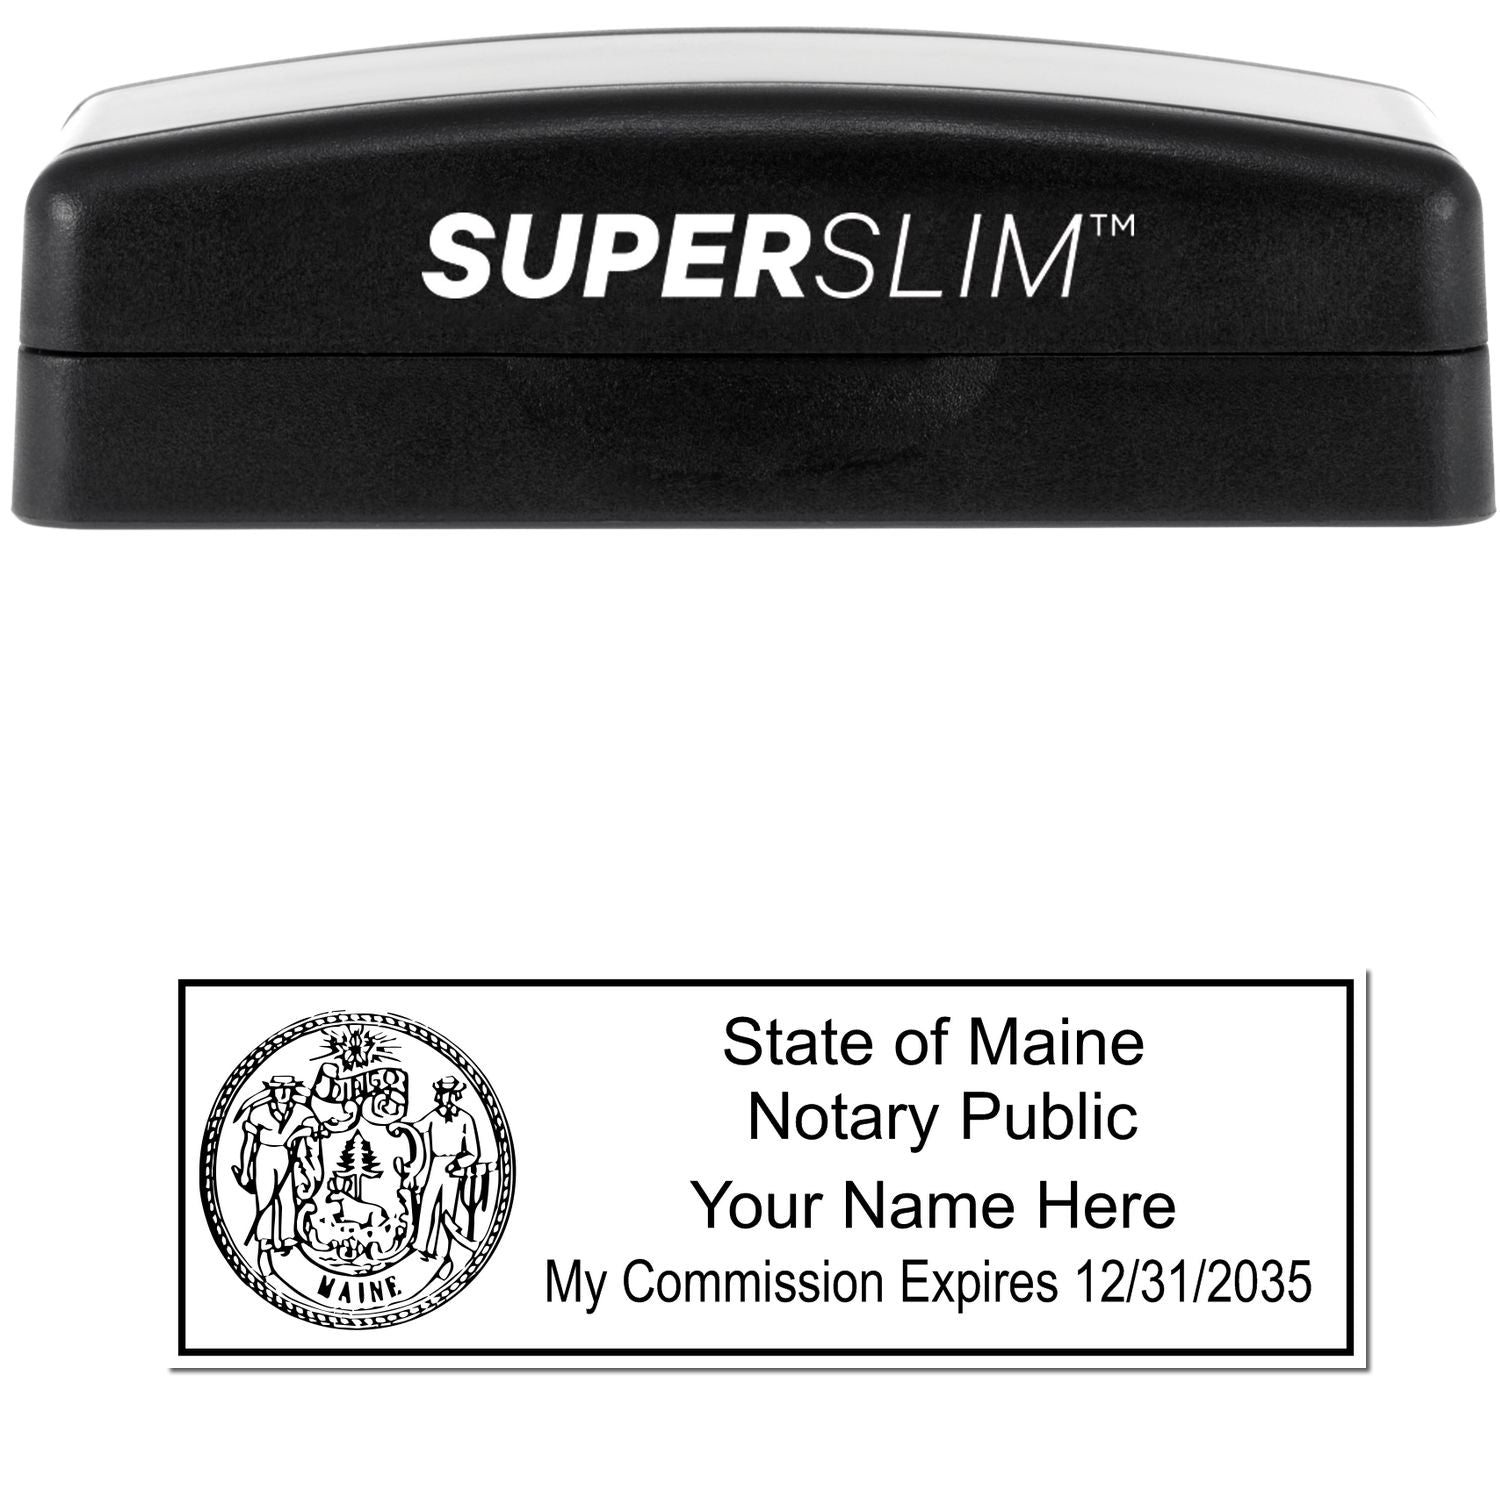 The main image for the Super Slim Maine Notary Public Stamp depicting a sample of the imprint and electronic files